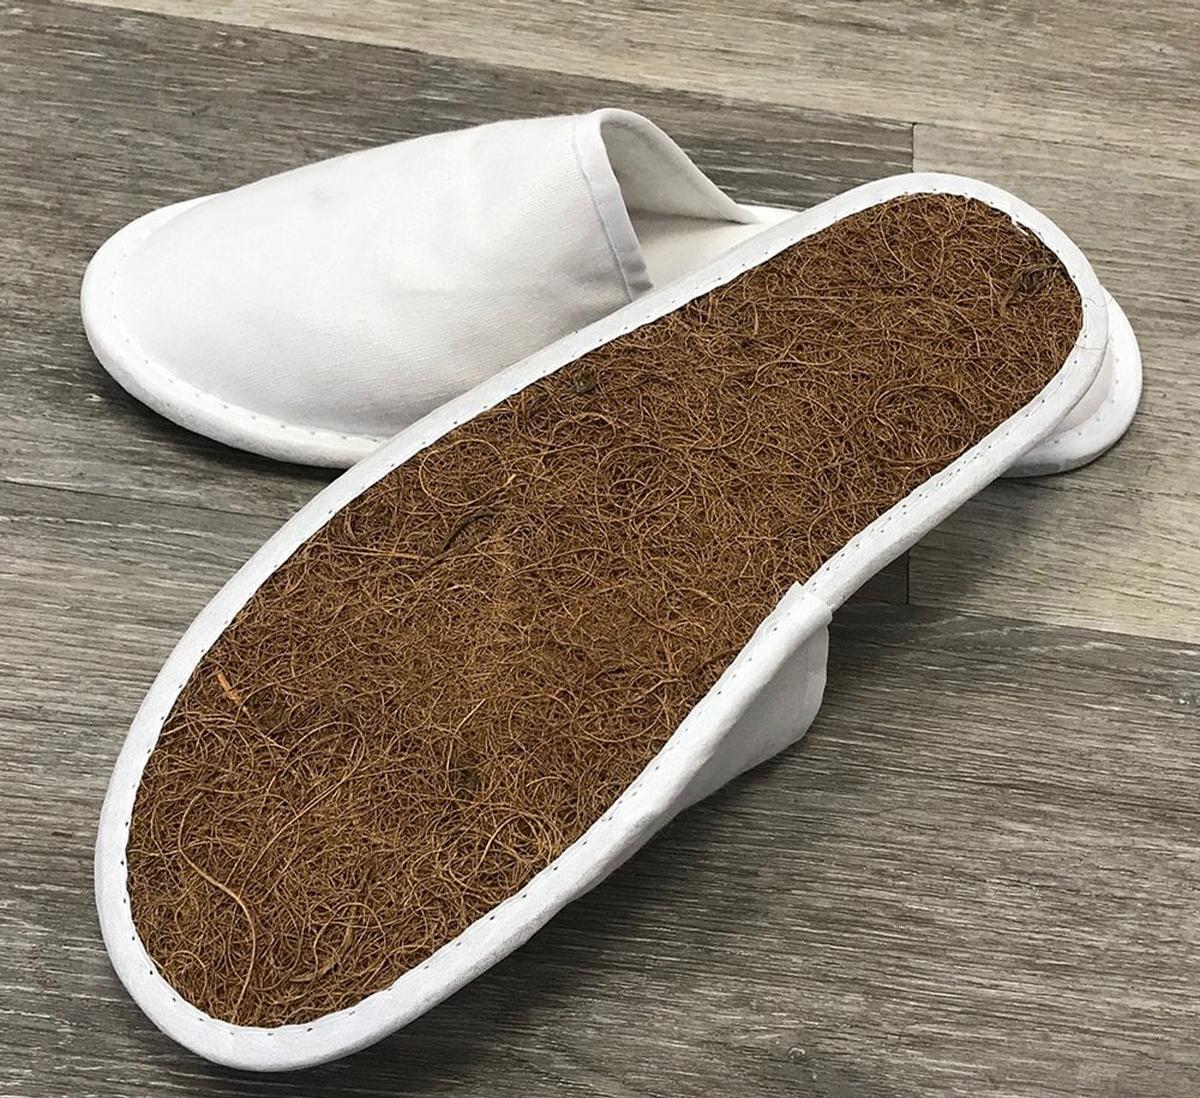 After use, the slippers can be easily disposed of with food waste / BC SoftWear